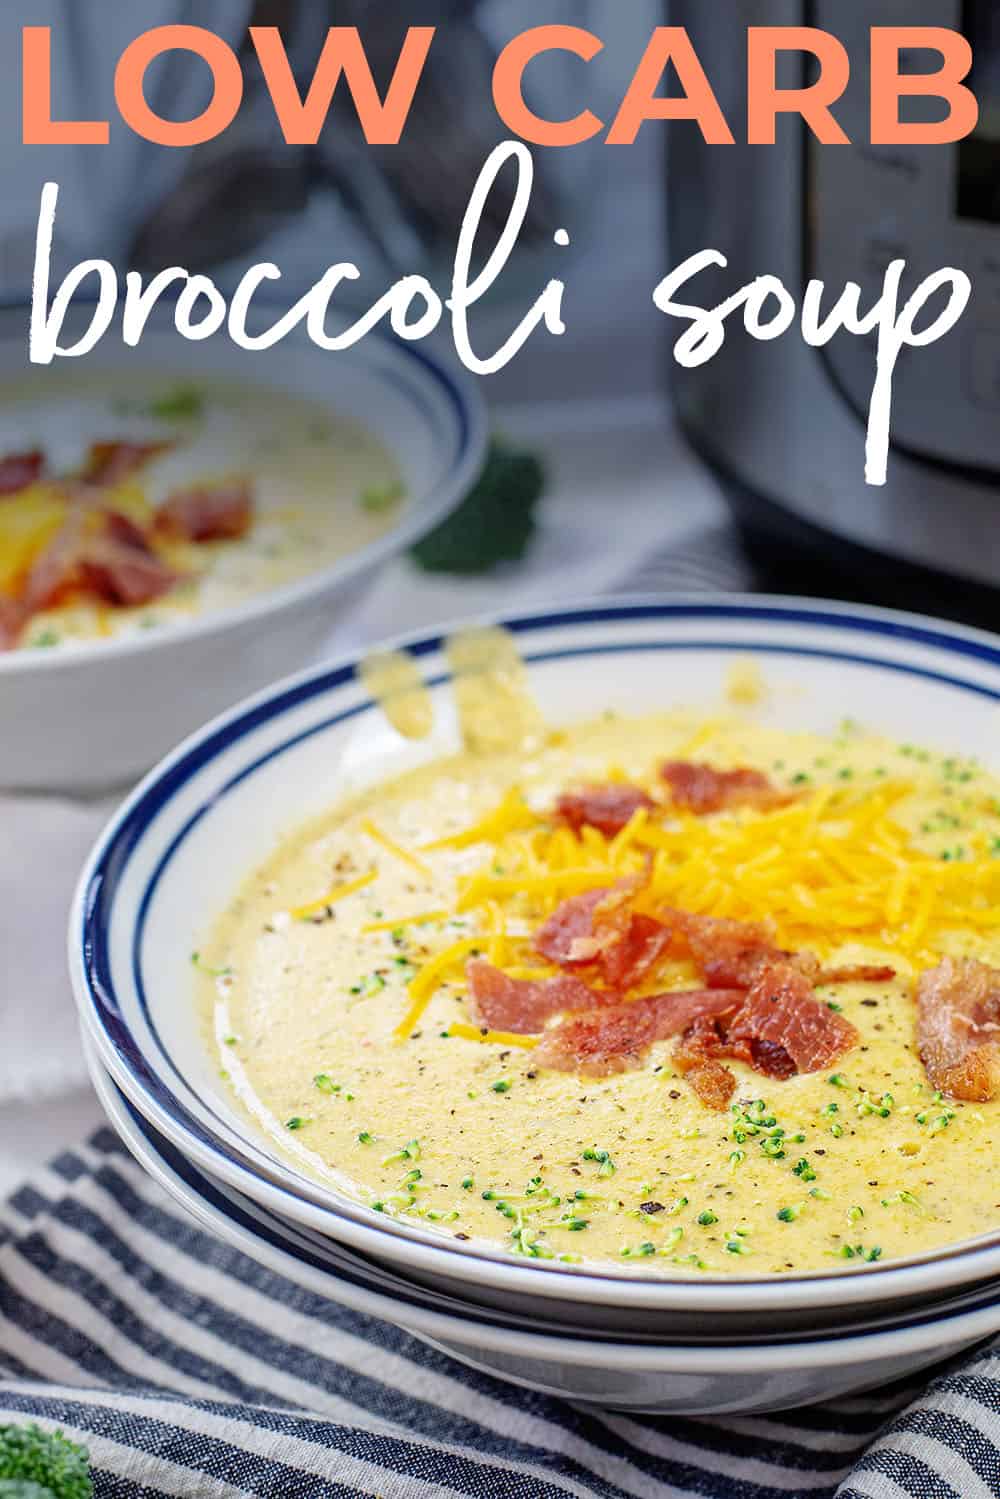 low carb broccoli soup in bowl.